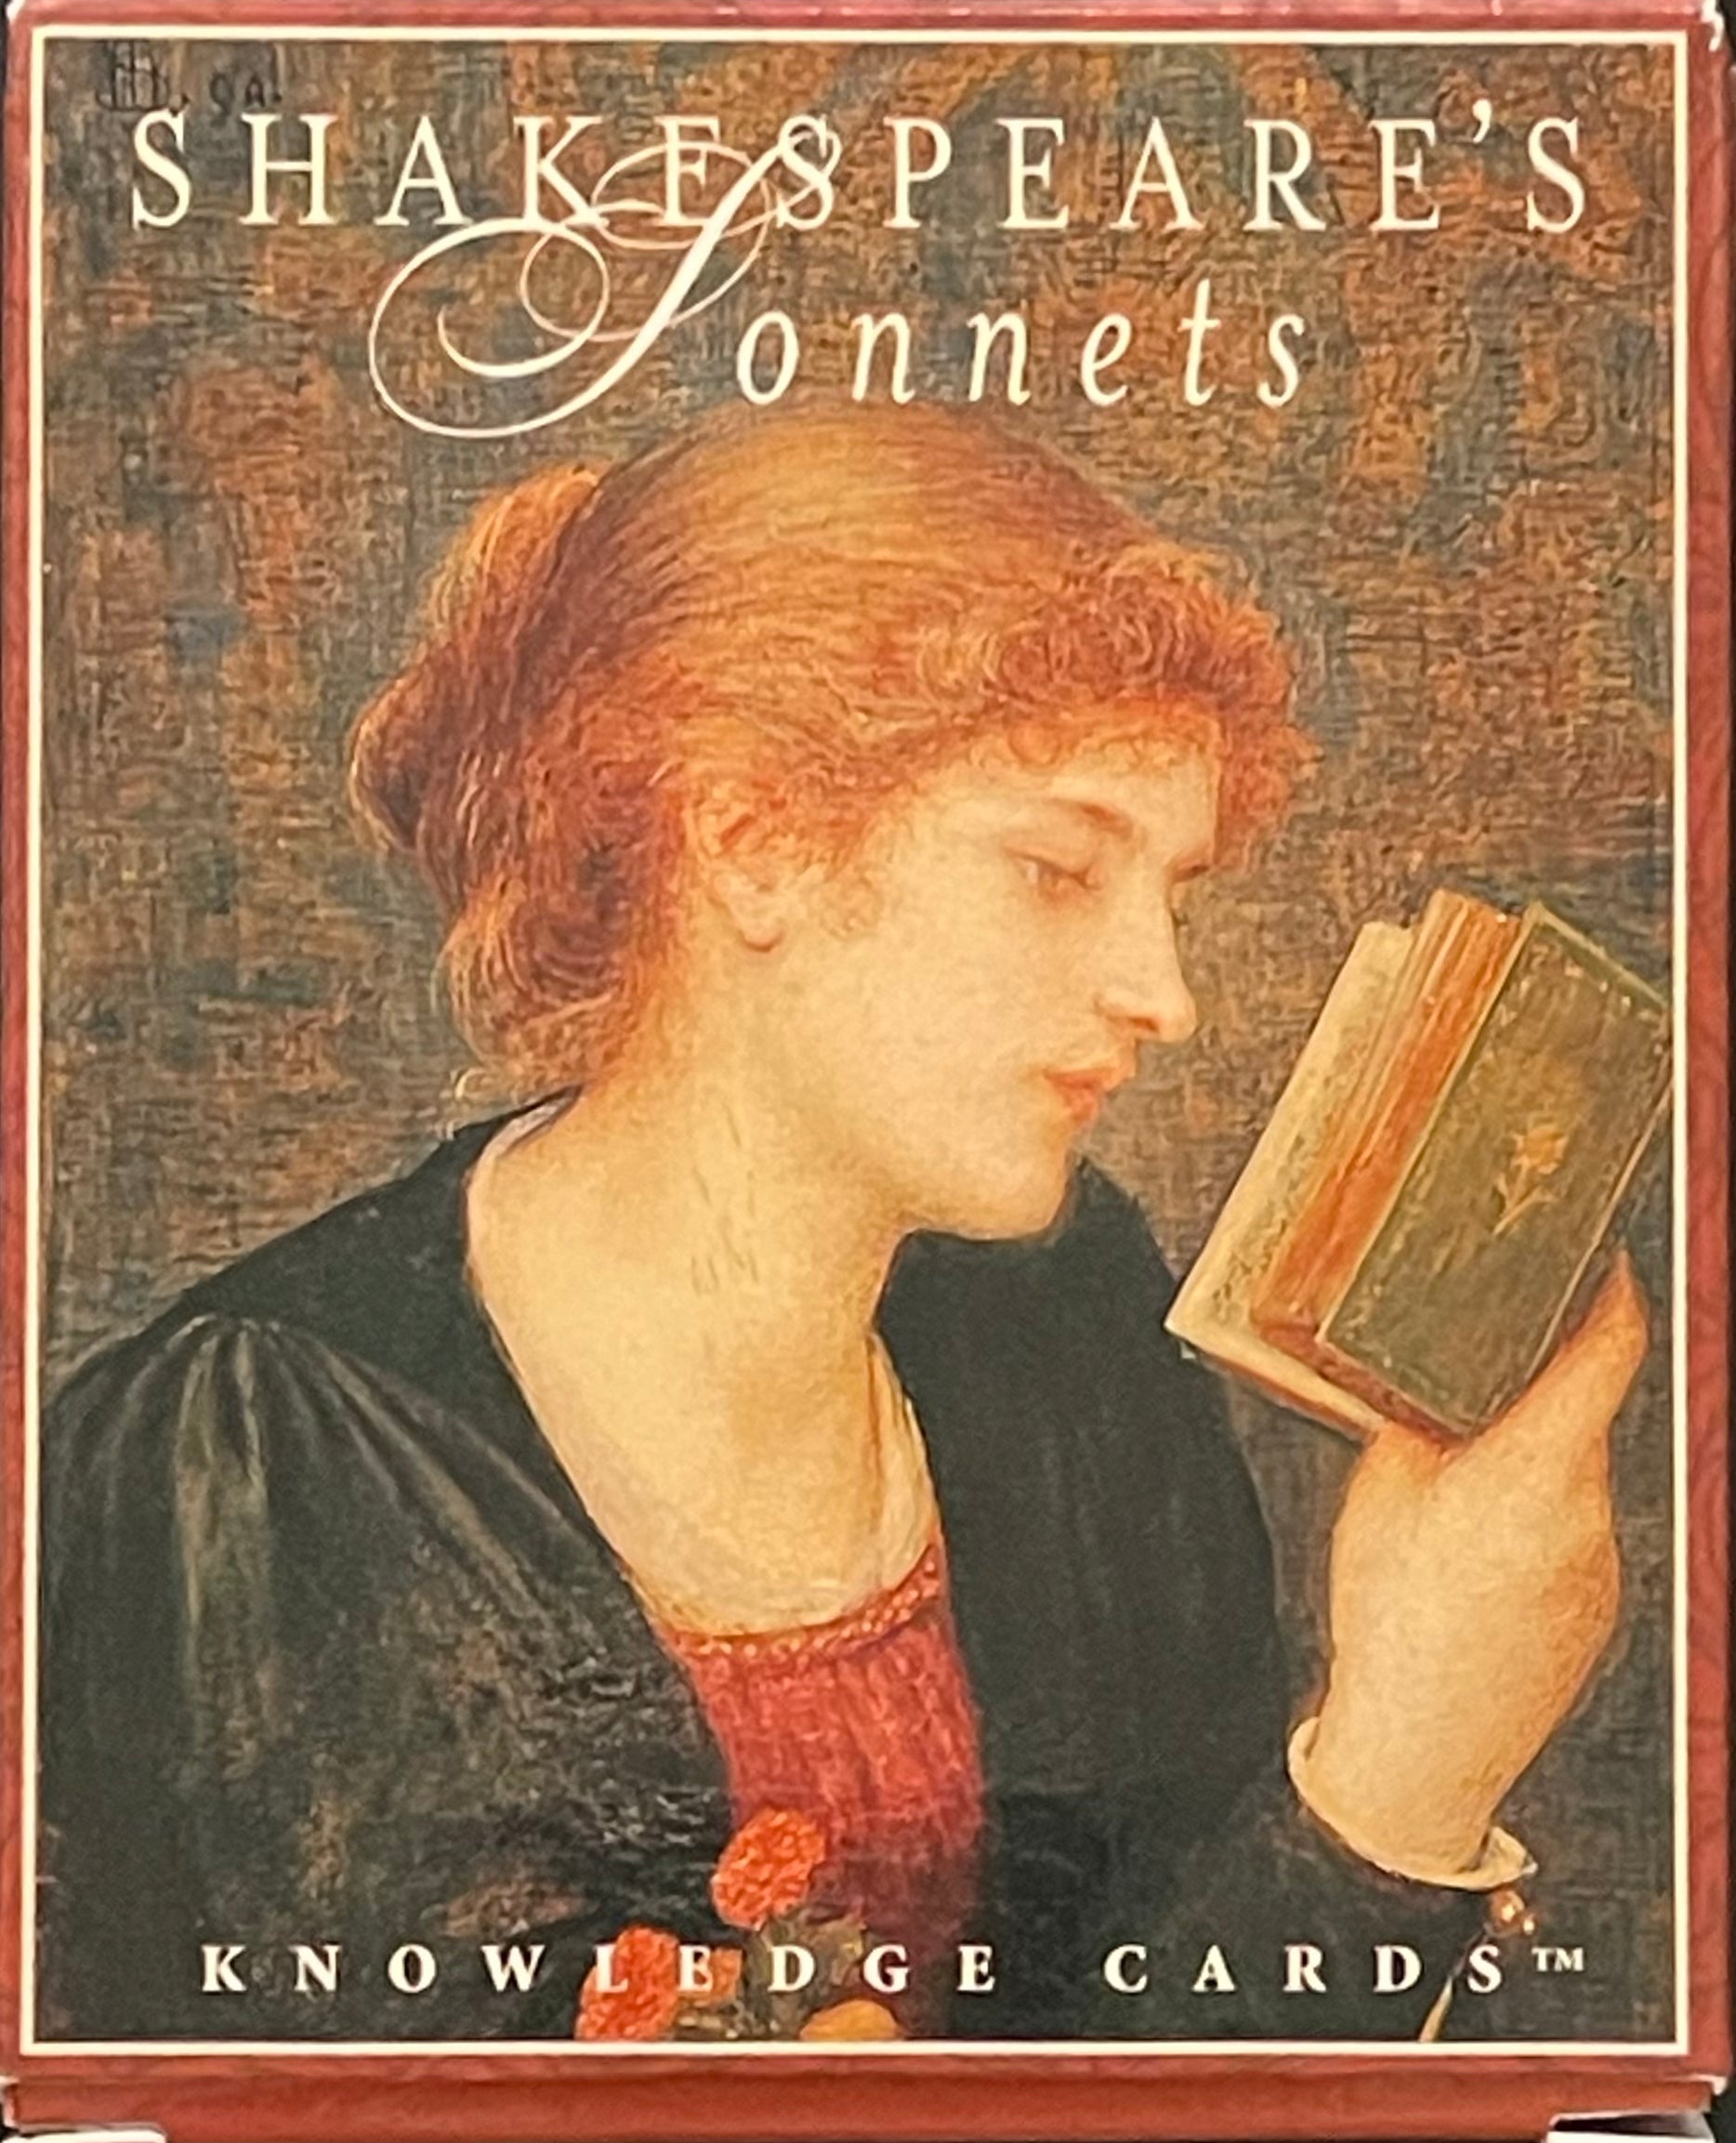 Rental - Shakespeare's Sonnets - Knowledge Cards